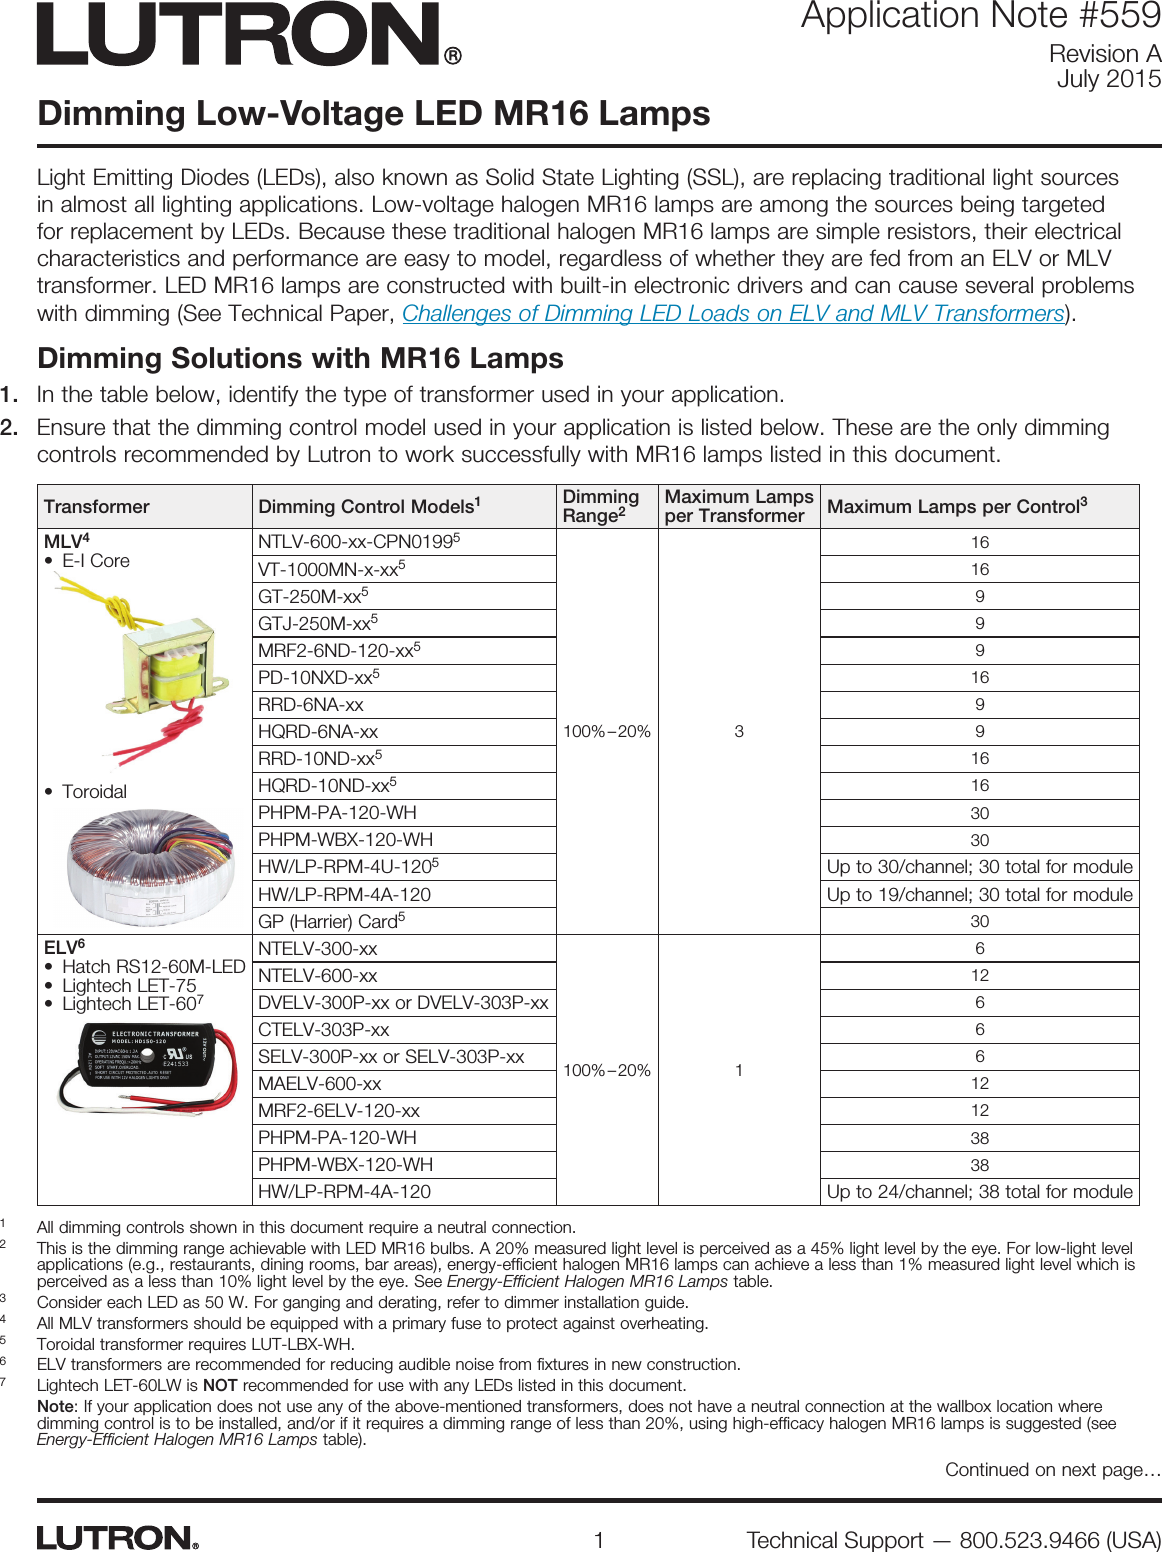 Page 1 of 4 - Dimming Low-Voltage LED MR16 Lamps APP NOTE 559  150136-Catalog